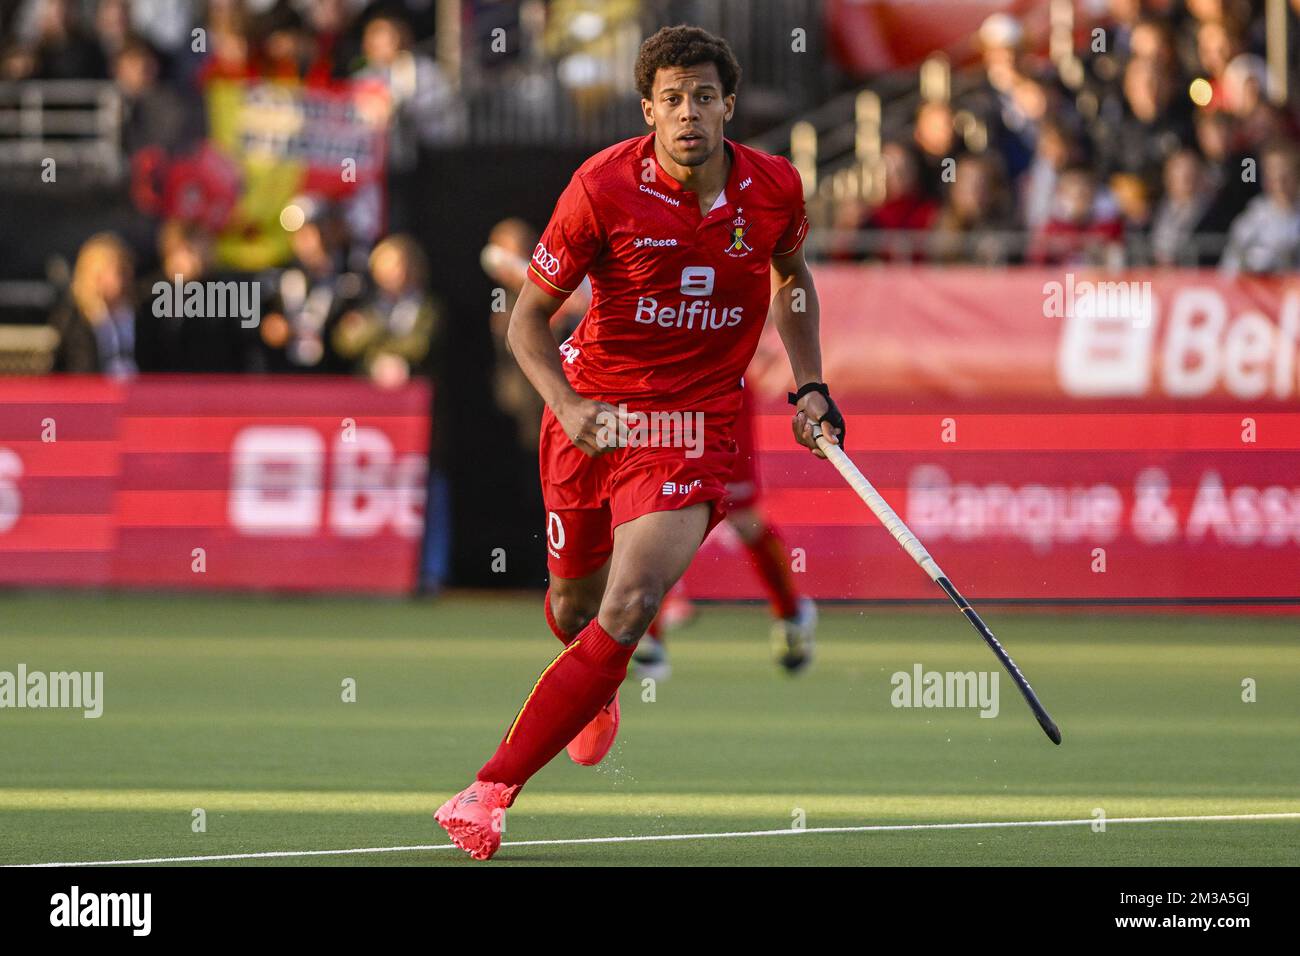 Belgium's Nelson Onana pictured during a hockey match between the Belgian  Red Lions and Spain in the group stage (game 7 out of 16) of the Men's FIH  Pro League competition, Friday